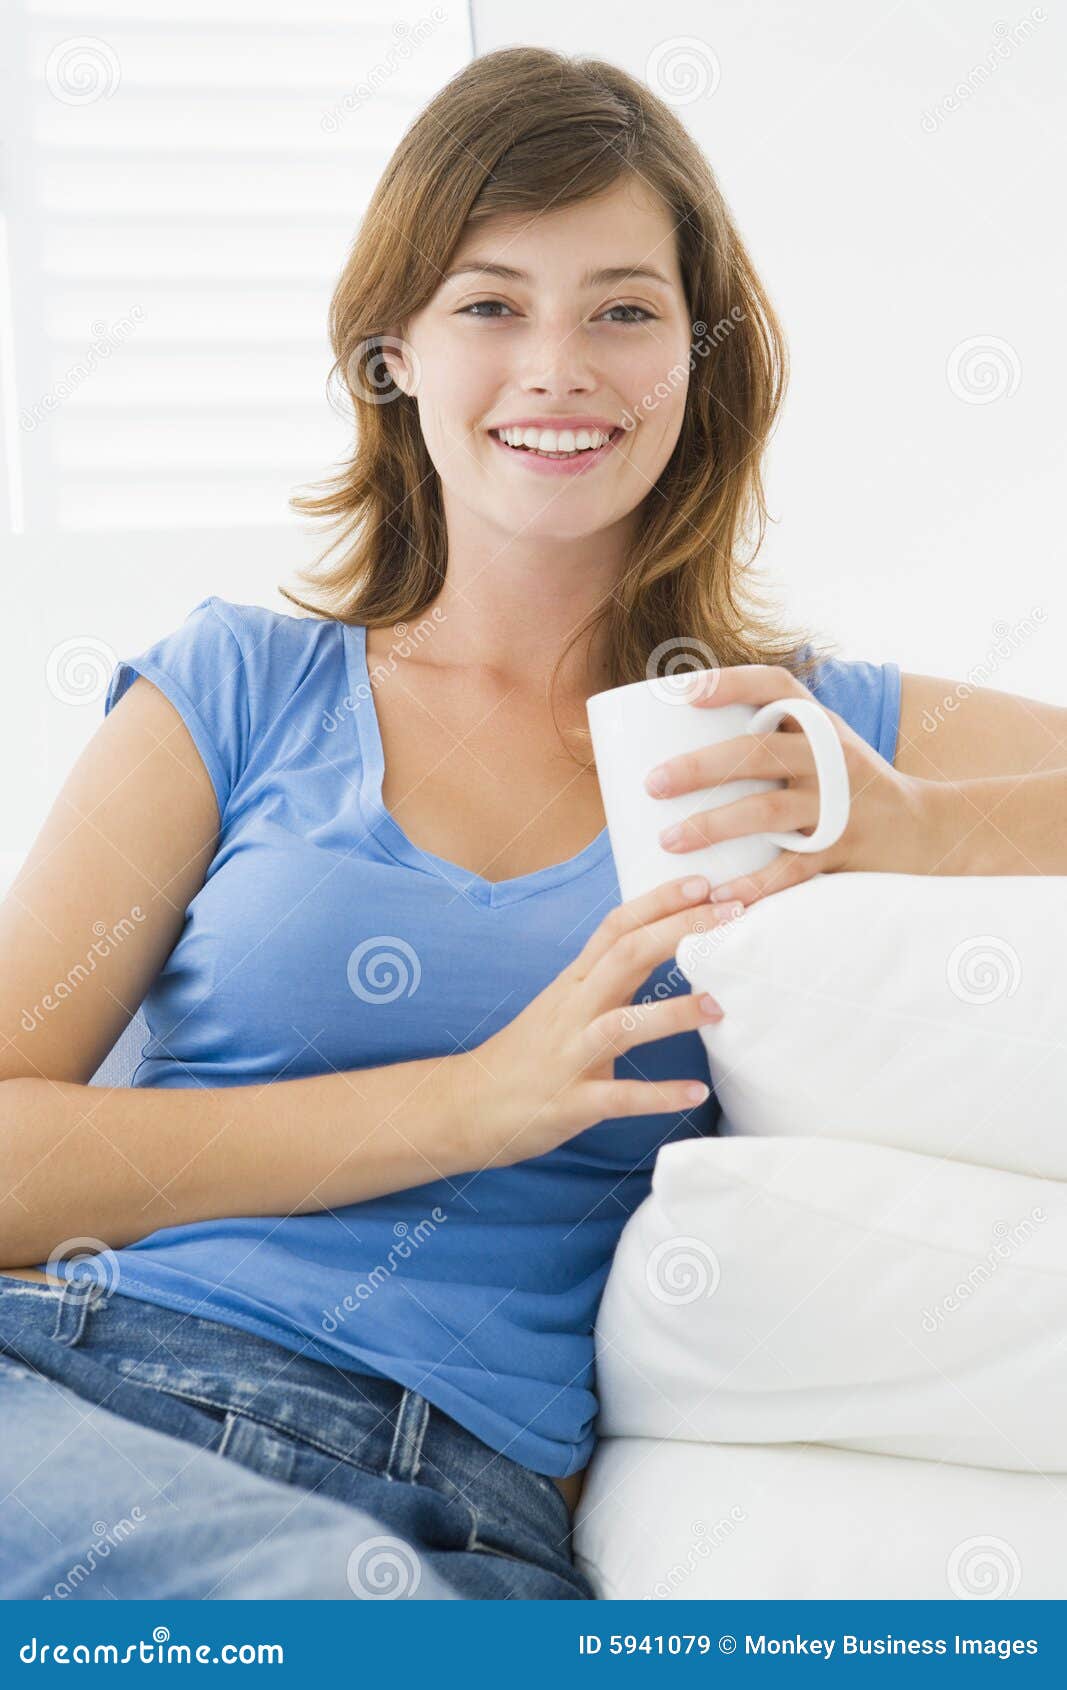 Woman in living room with coffee smiling at camera